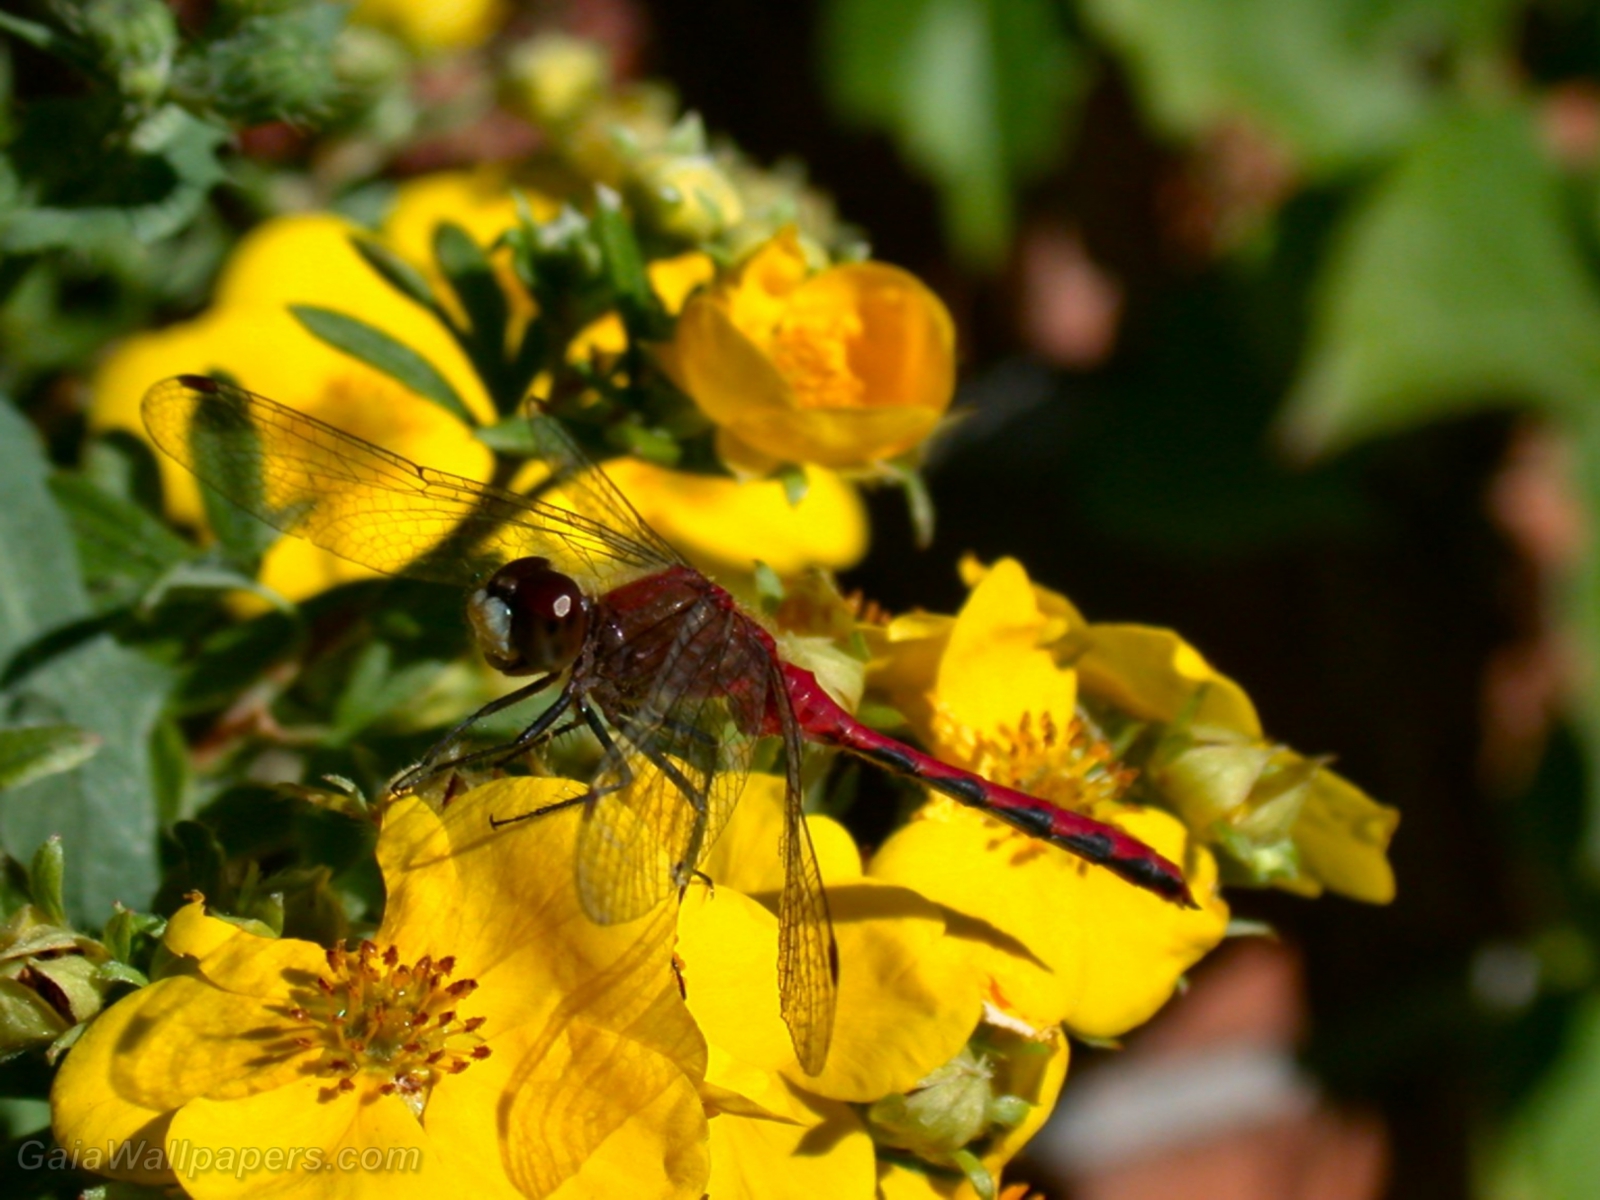 Dragonfly on a yellow flower - Free desktop wallpapers